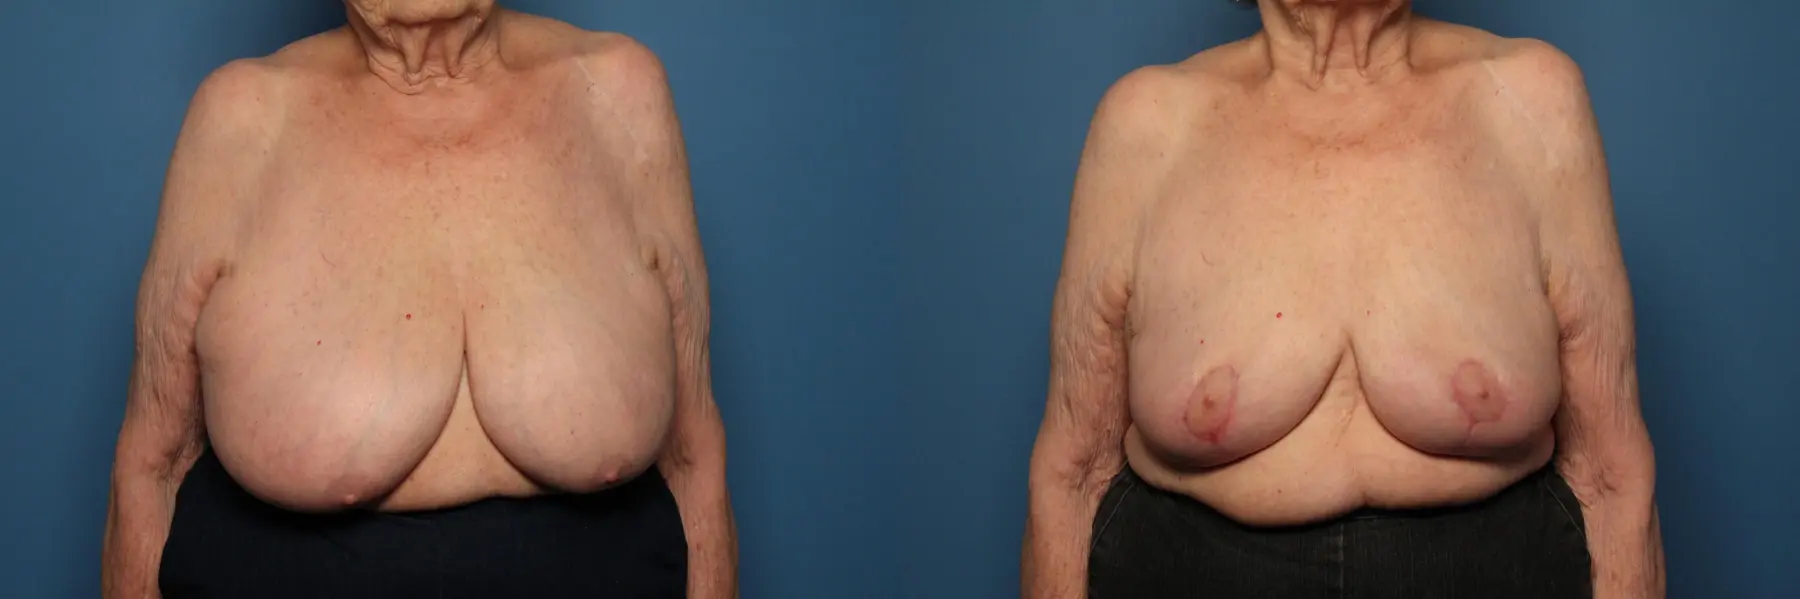 Breast Lift-Reduction: Patient 21 - Before and After  